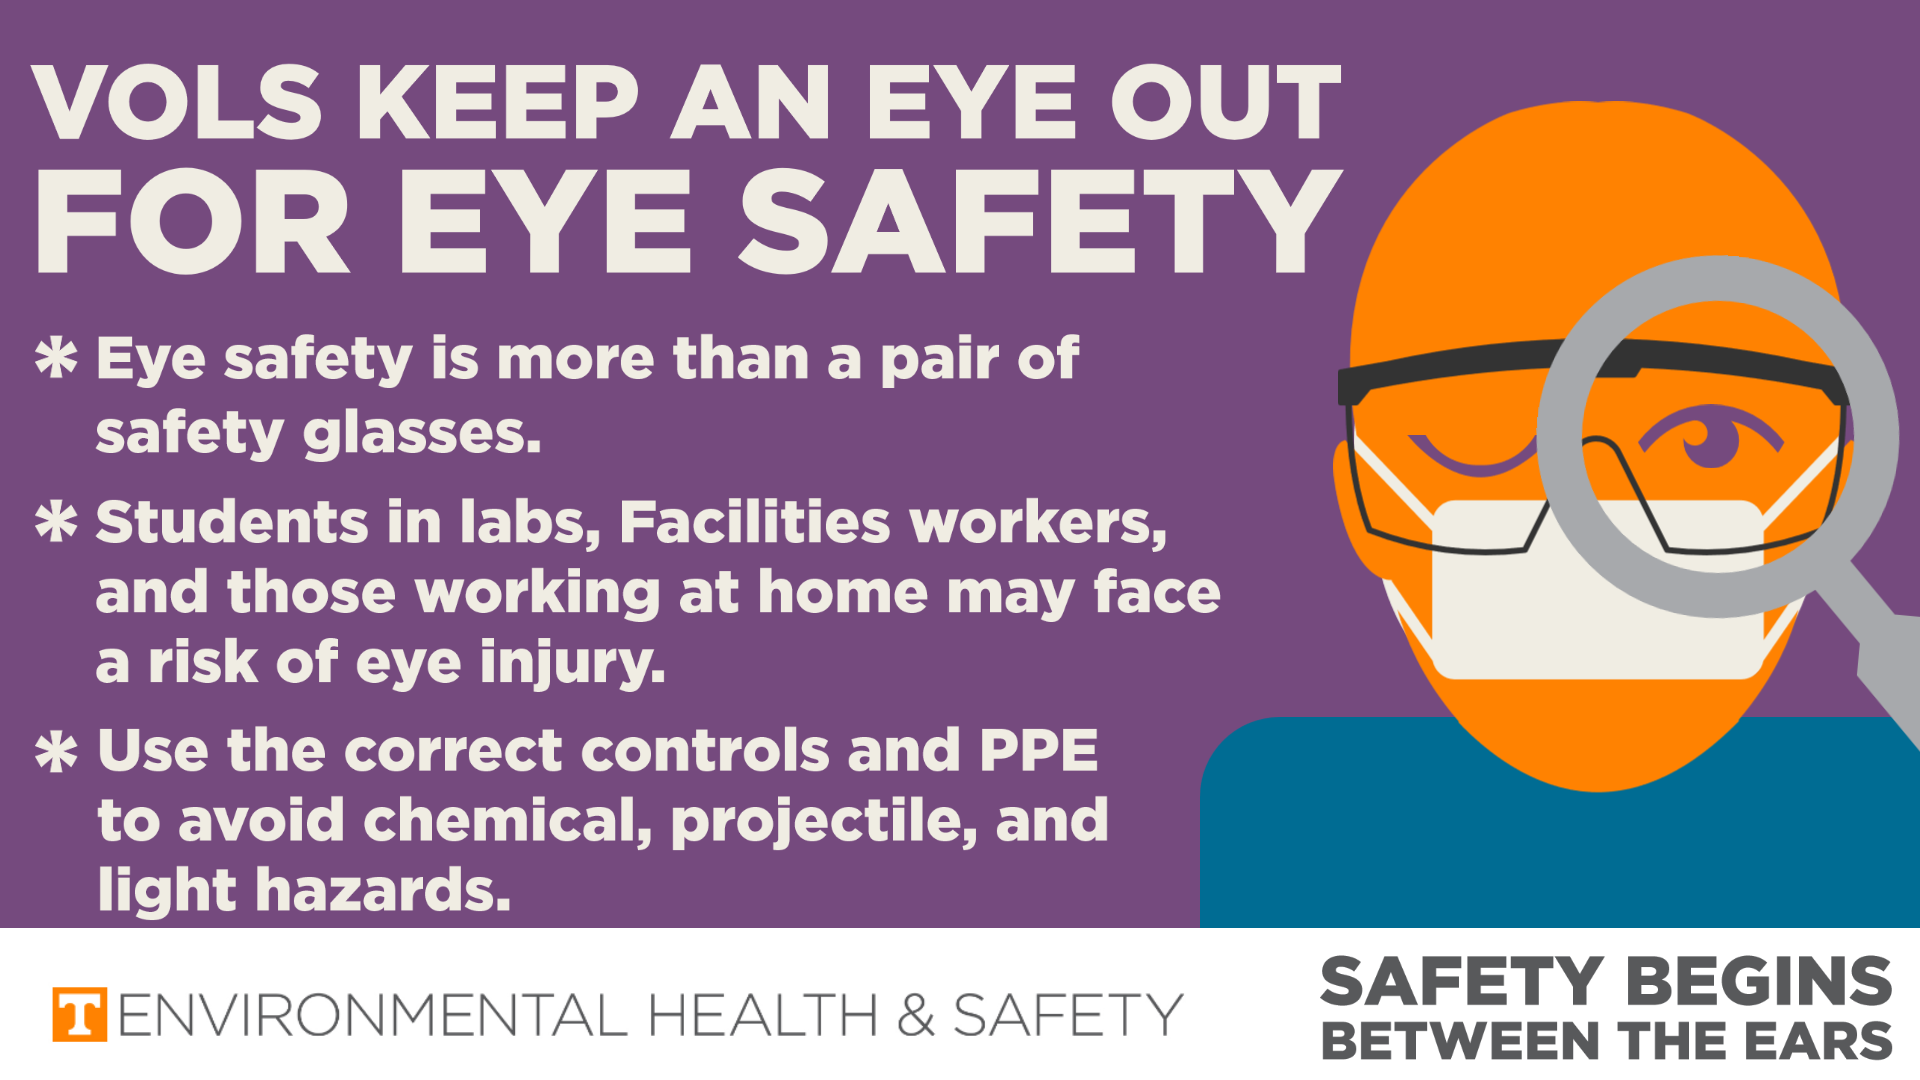 An infographic that reminds Vols to Keep an eye out for safety. Eye safety is more than a pair of safety glasses. Students in labs, Facilities Services workers, and even those working at home may face a risk. Use the correct controls and PPE to prevent injury from hazards such as chemicals, projectiles, and intense light. 